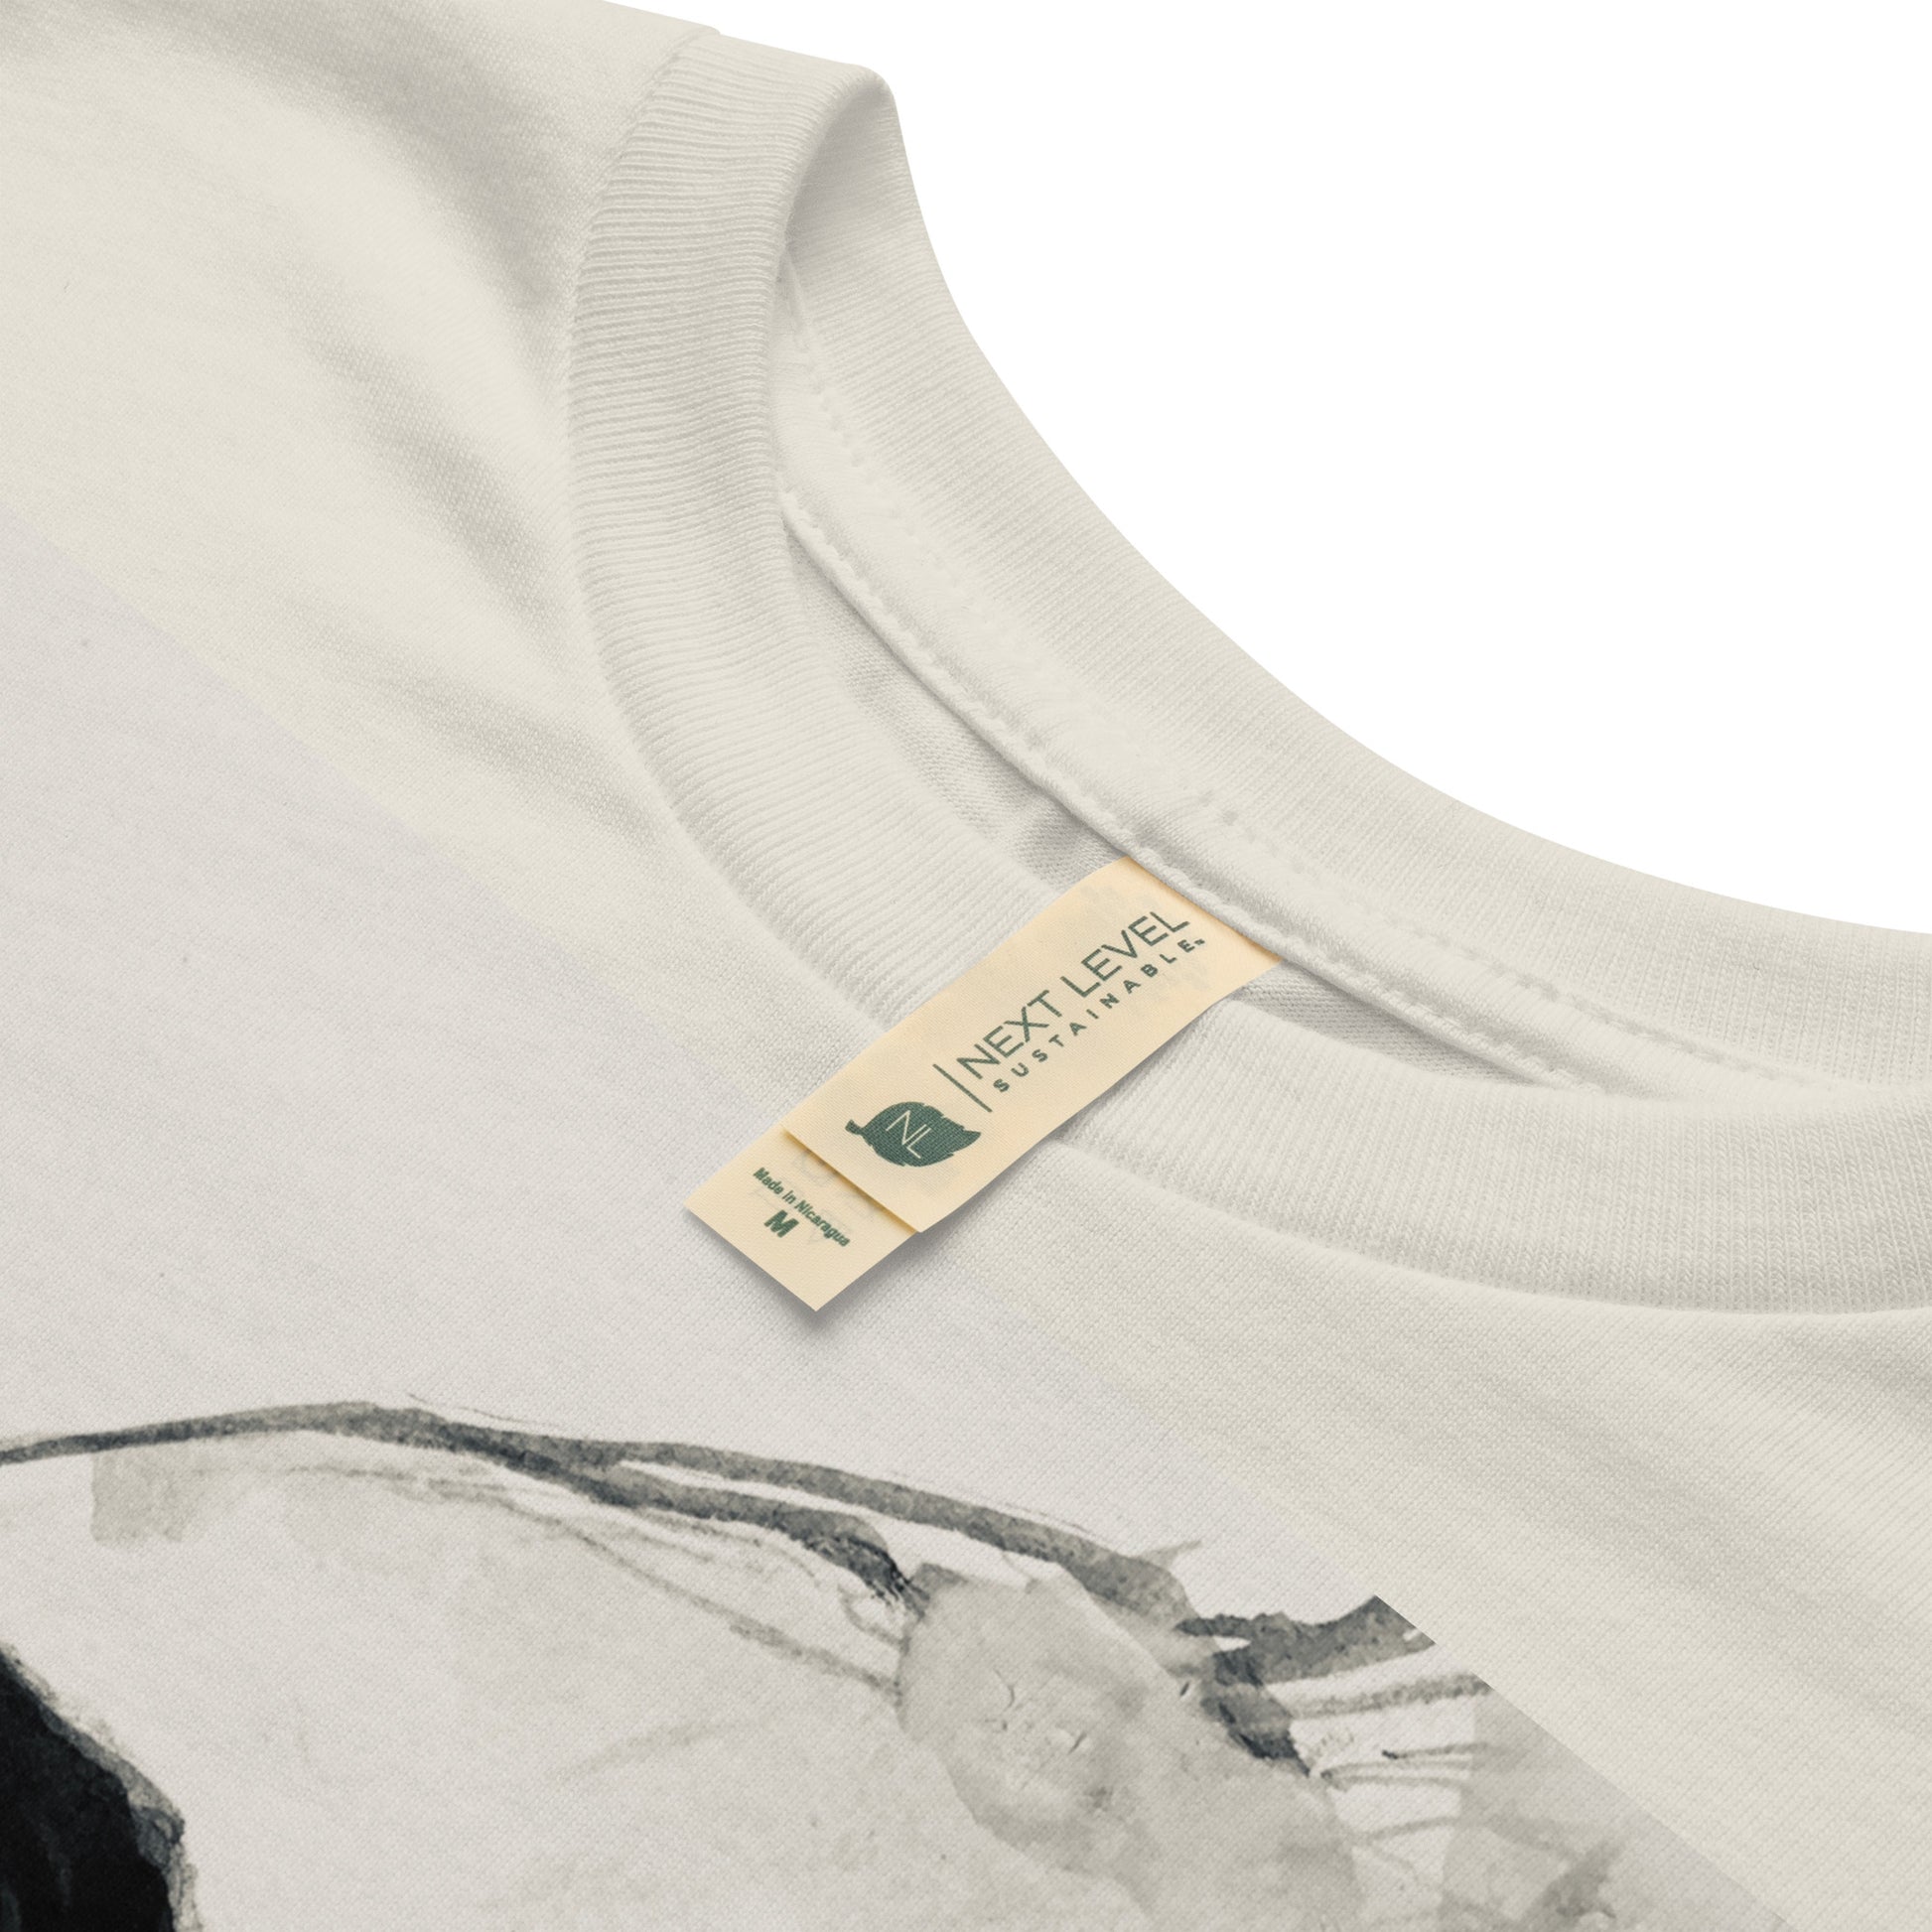 Self Awareness Tshirt made of Sustainable Material